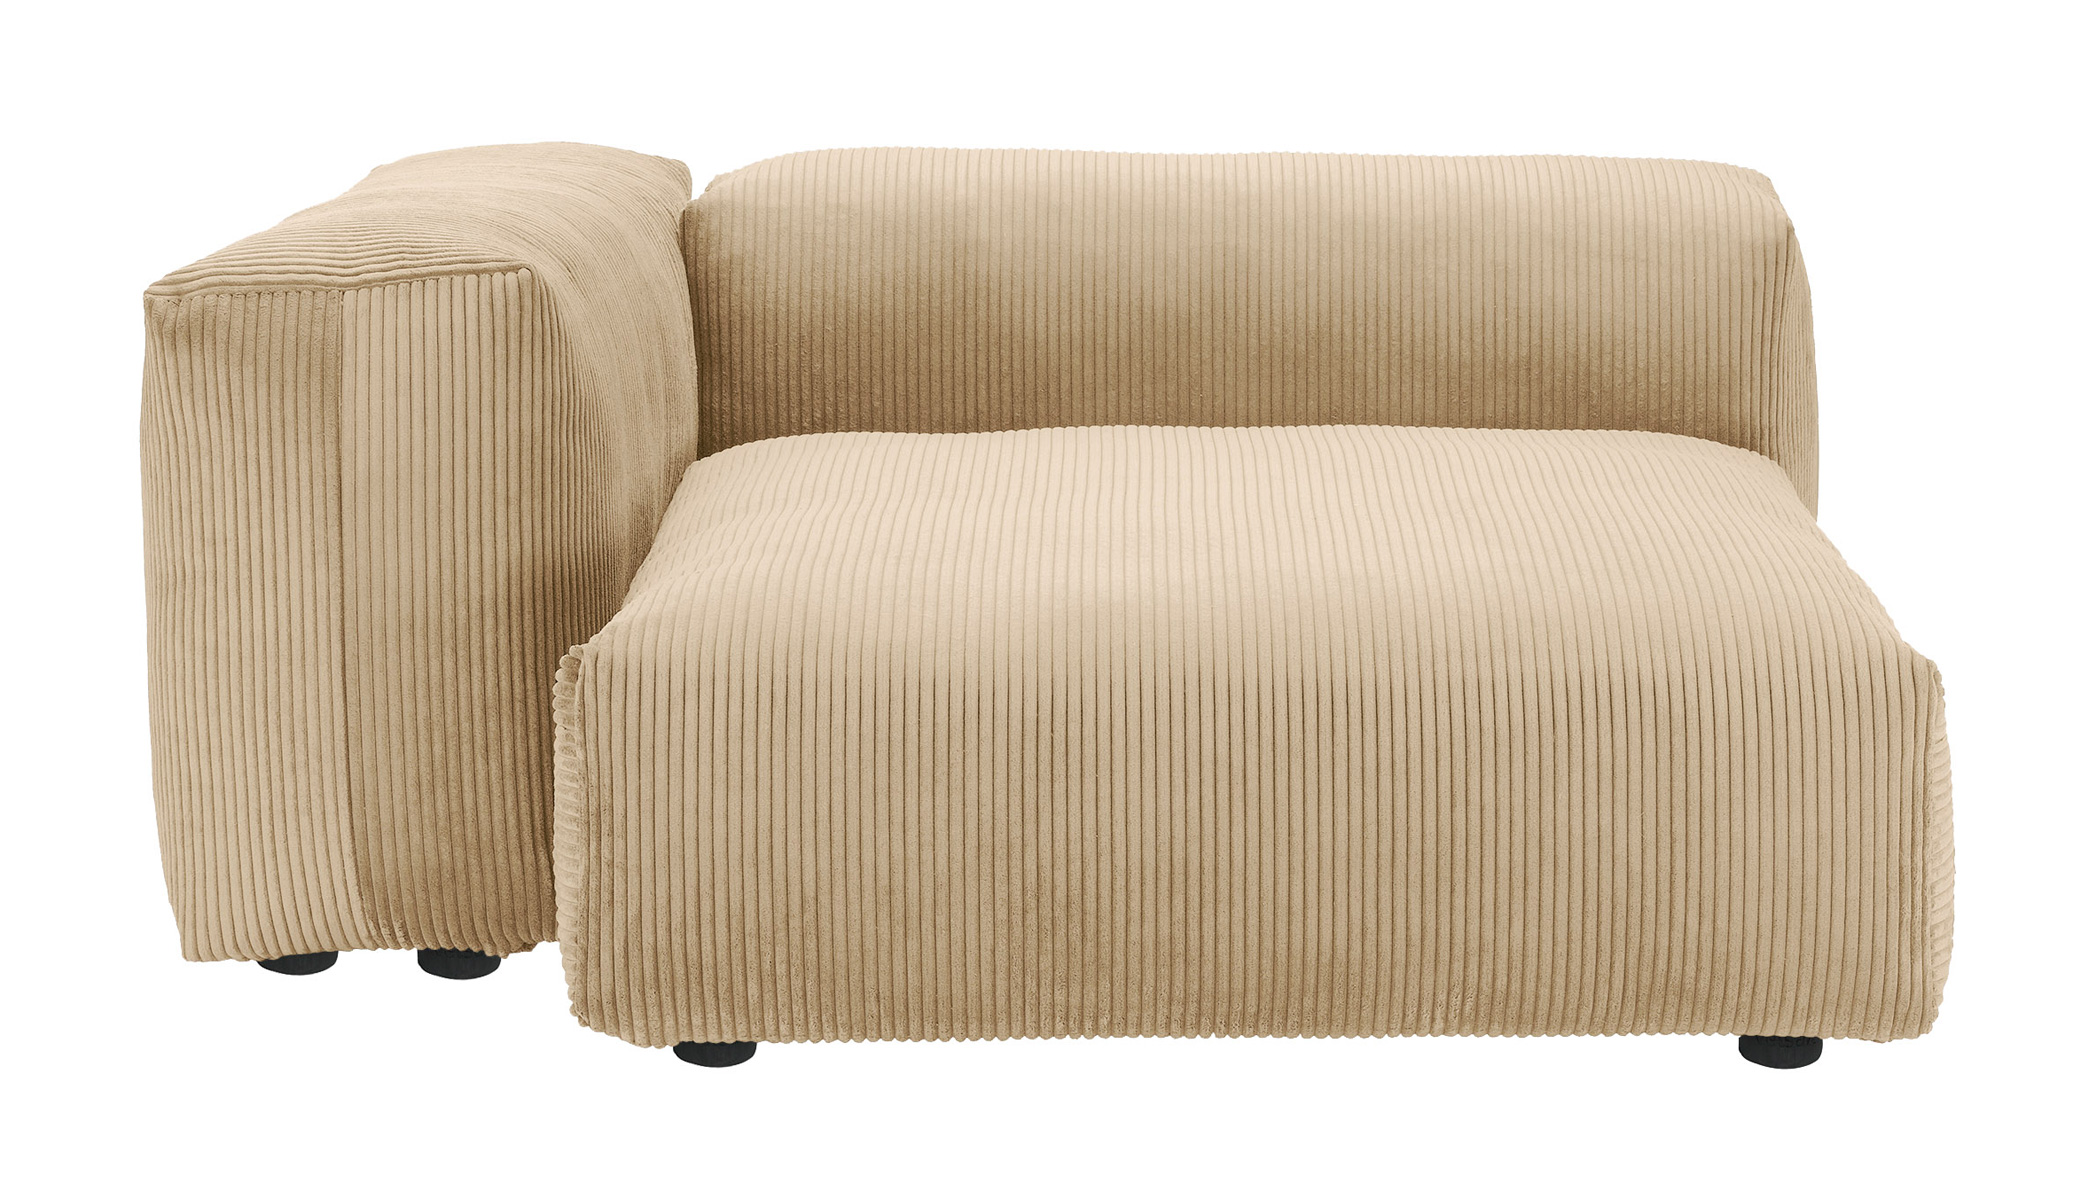  Sofa 1 Large 2 Side Cord Velours sand